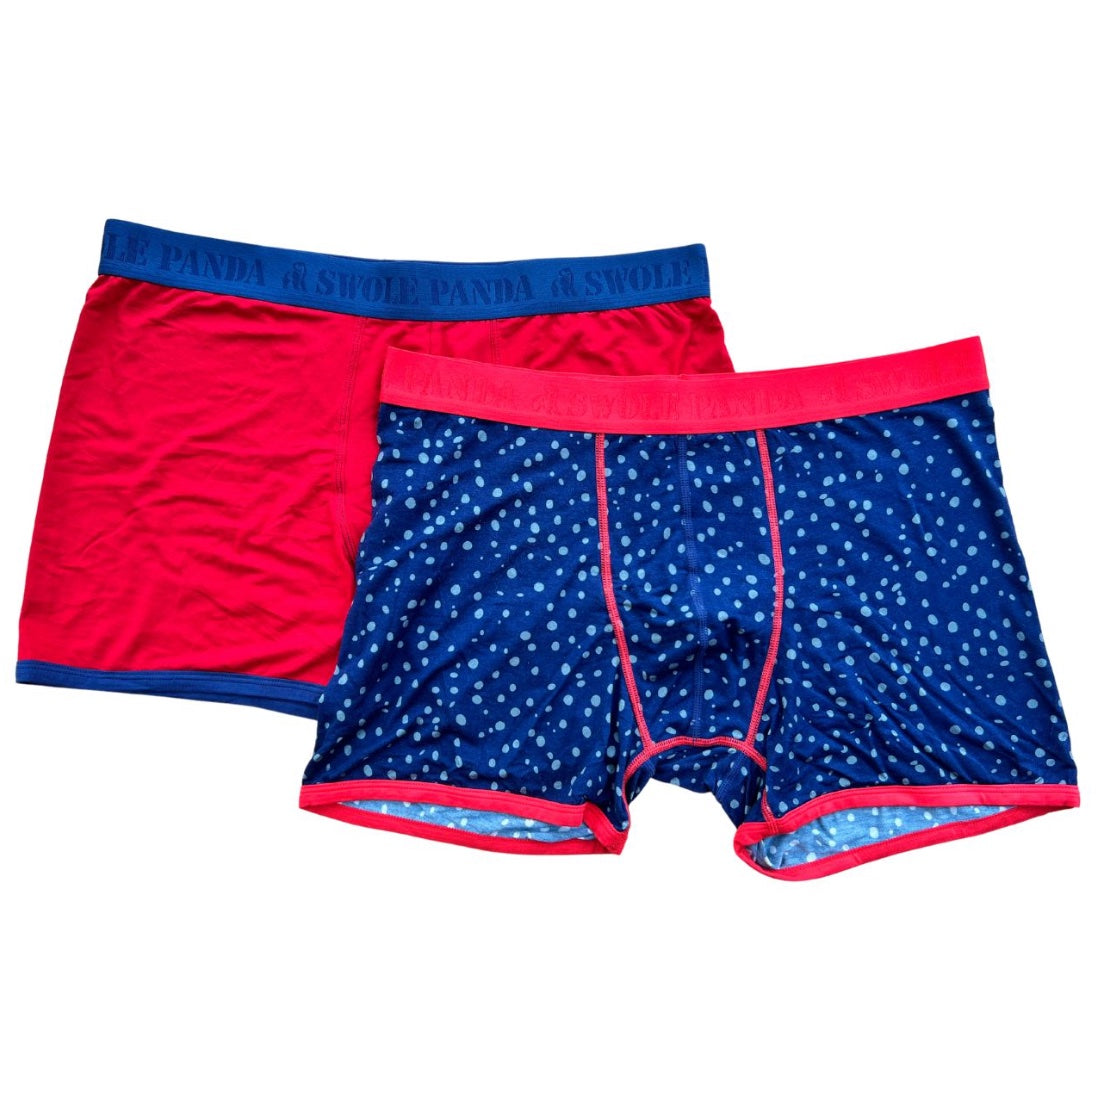 Bamboo Boxers 2 Pack - Red / Grey Spotted